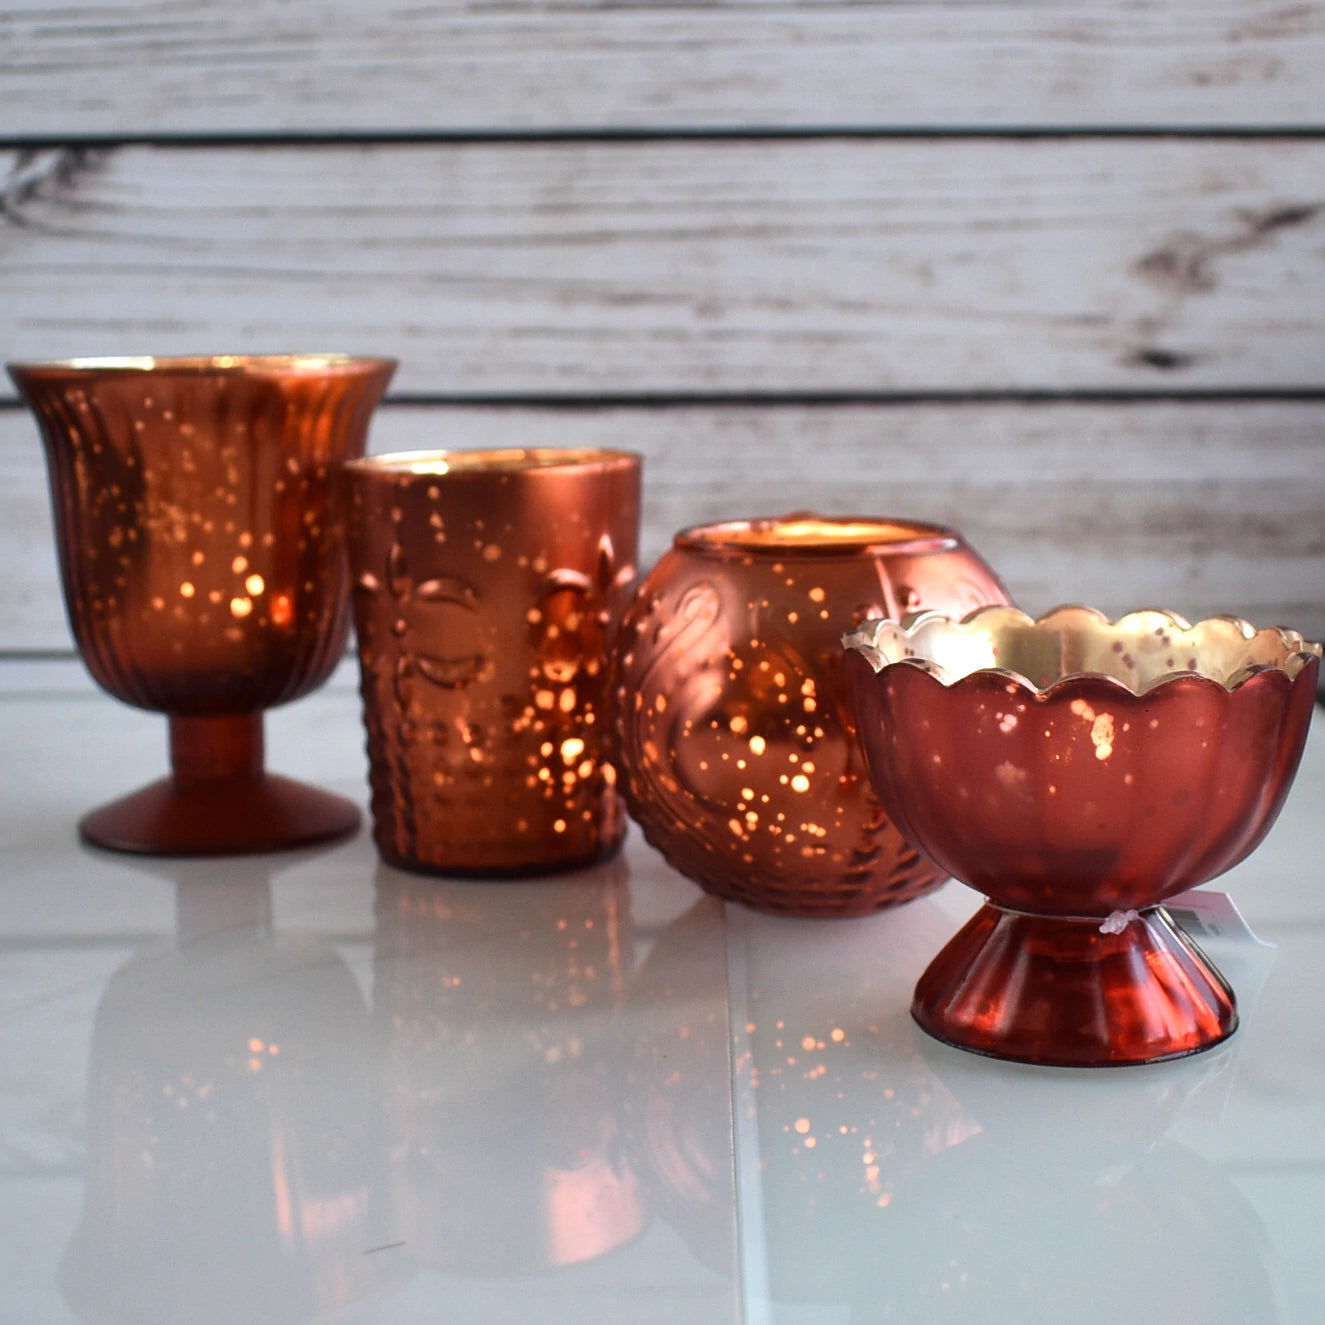 Vintage Glam Mercury Glass Tealight Votive Candle Holders (Rustic Copper Red, Set of 4, Assorted Designs, Sizes) - Weddings Events Parties Home Decor - PaperLanternStore.com - Paper Lanterns, Decor, Party Lights & More